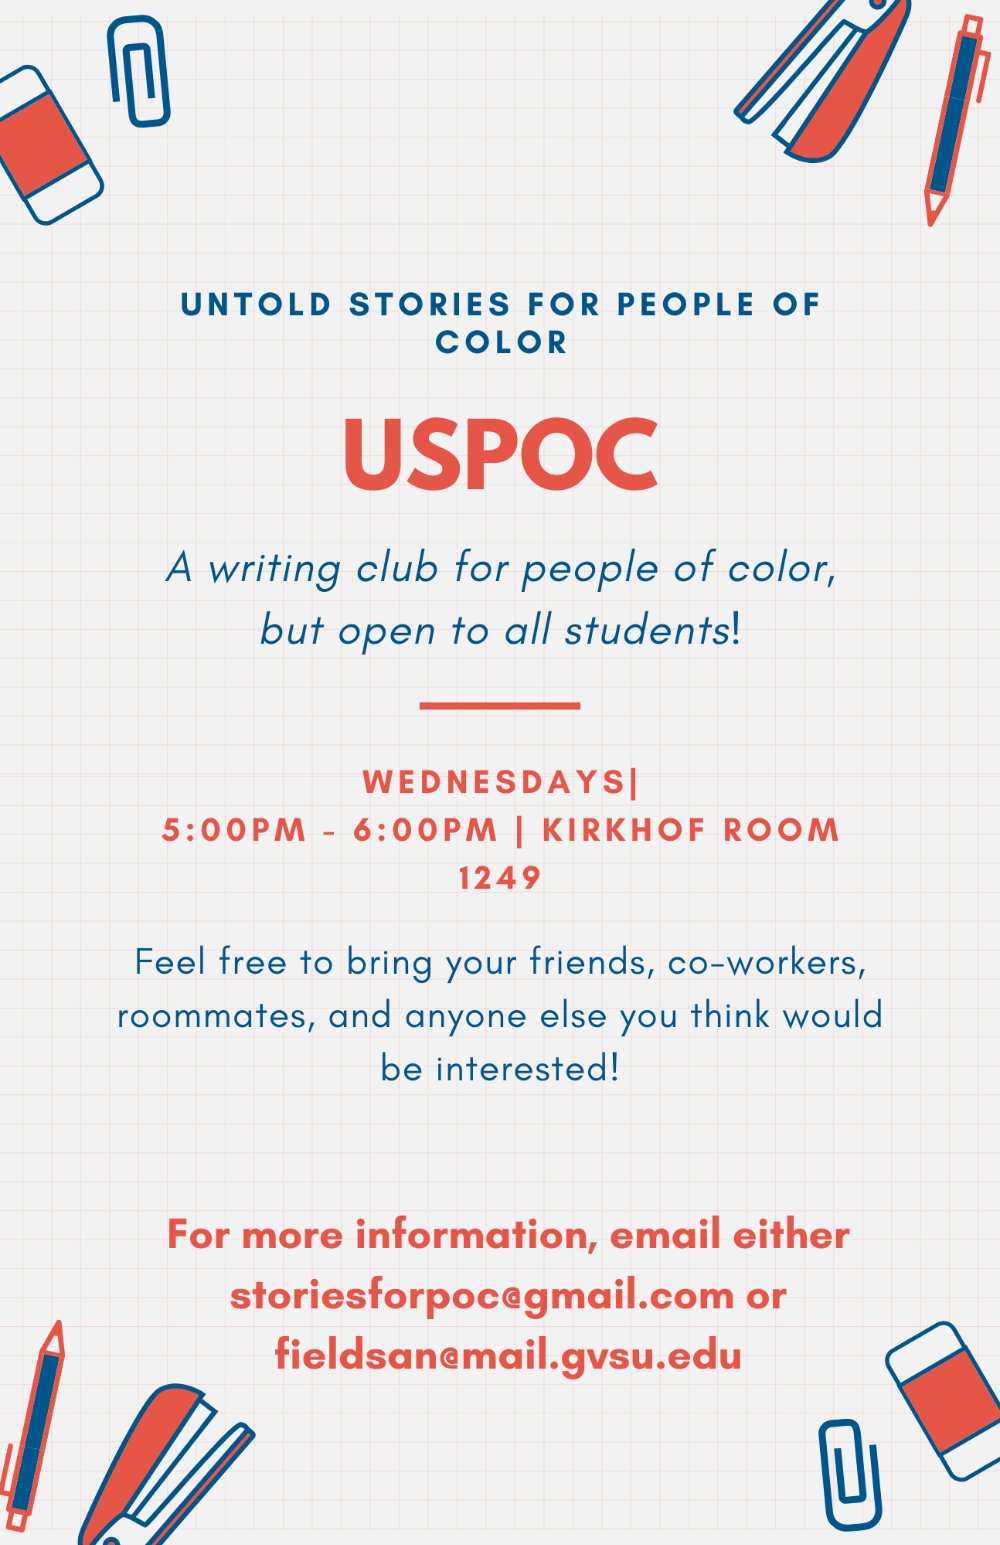 Welcome to USPOC